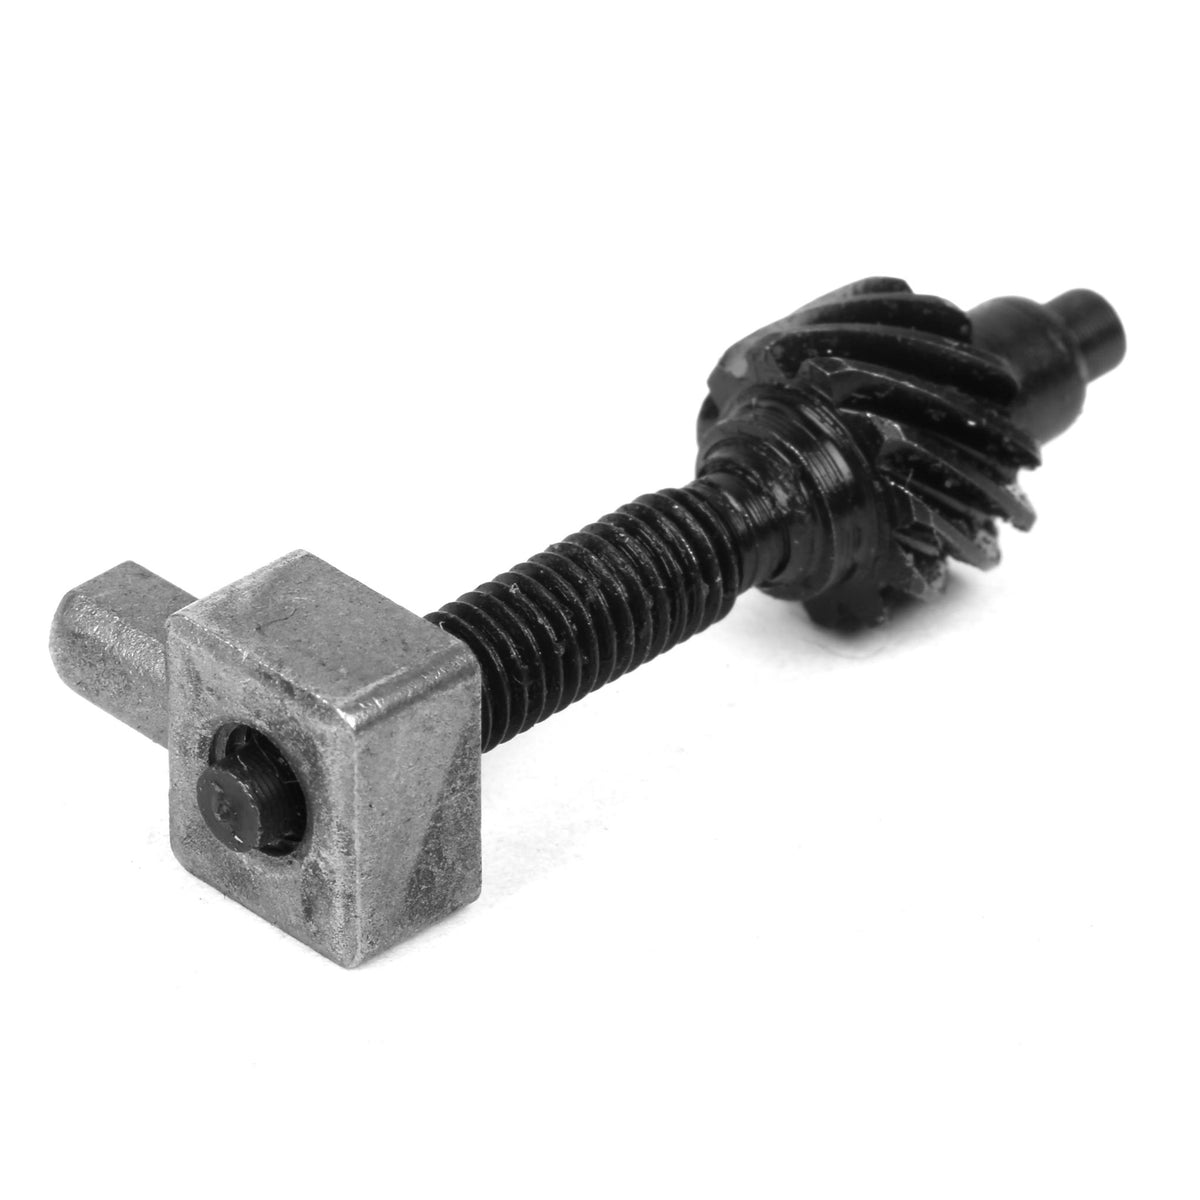 [4019-124Asm] Tension Screw Assembly, Includes Parts 4019-123 (Tension — WEN  Products